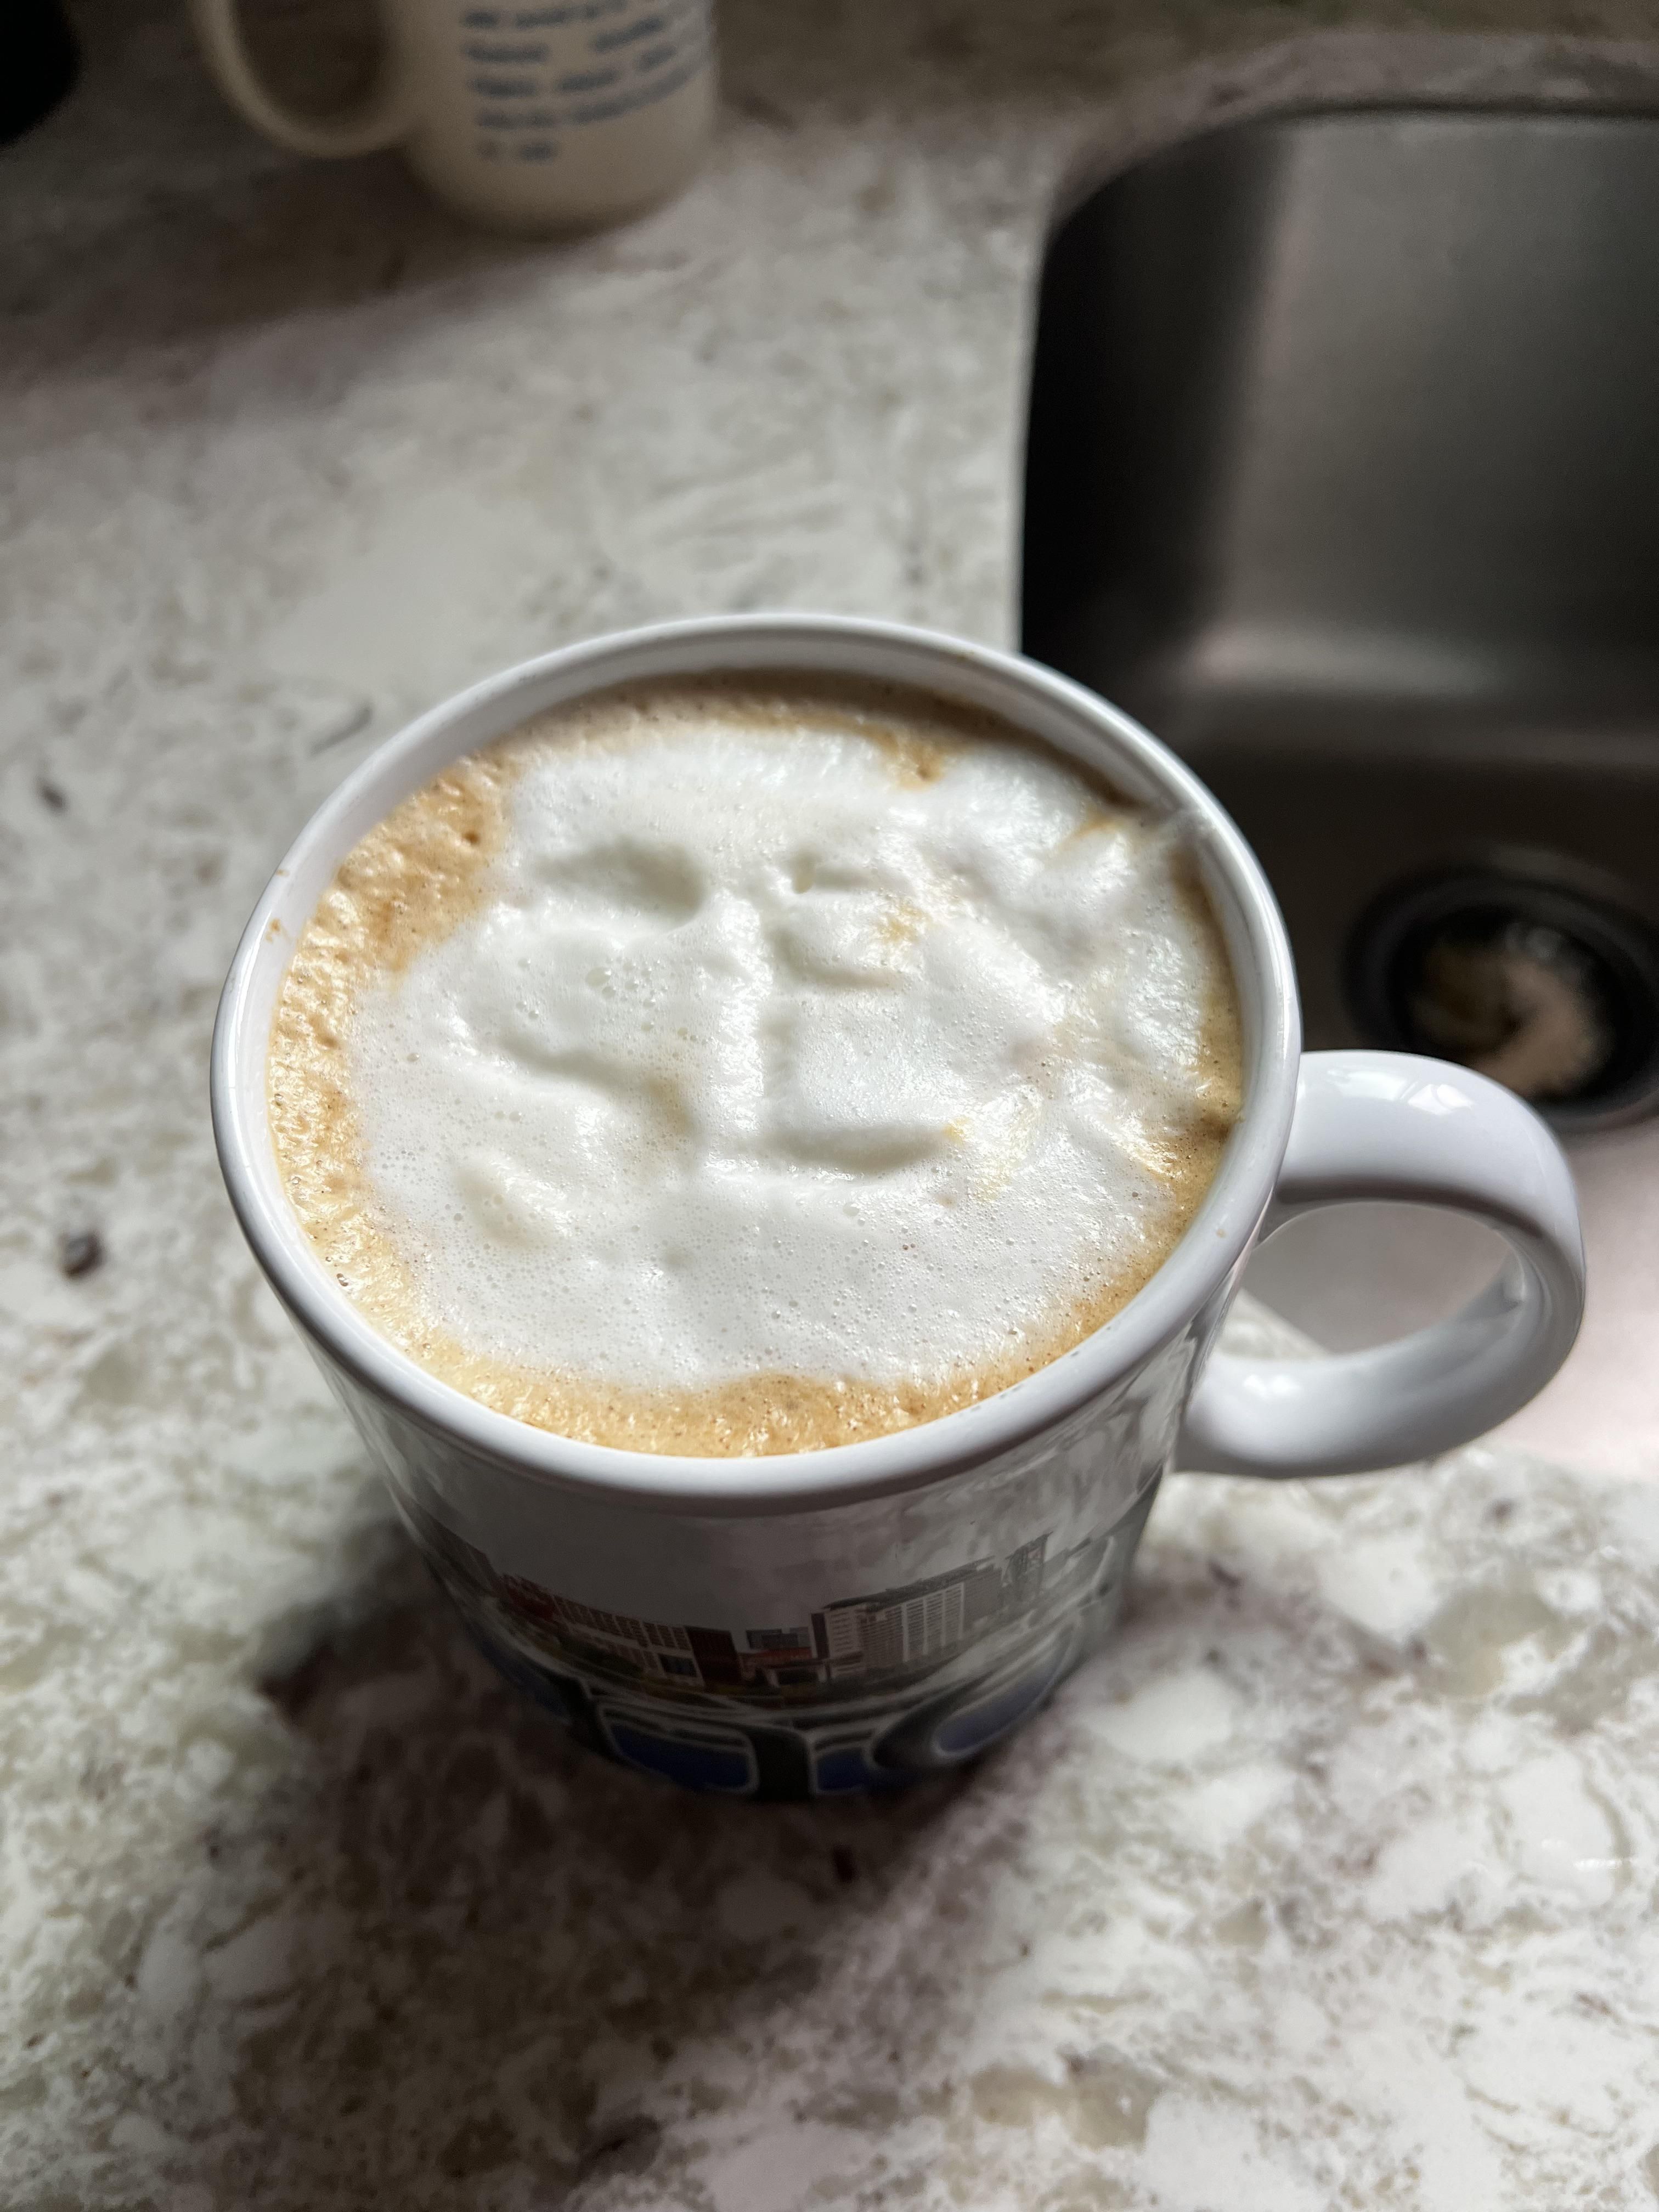 I like to make my wife lattes in the morning, it gives me a chance to slip in subliminal messages.